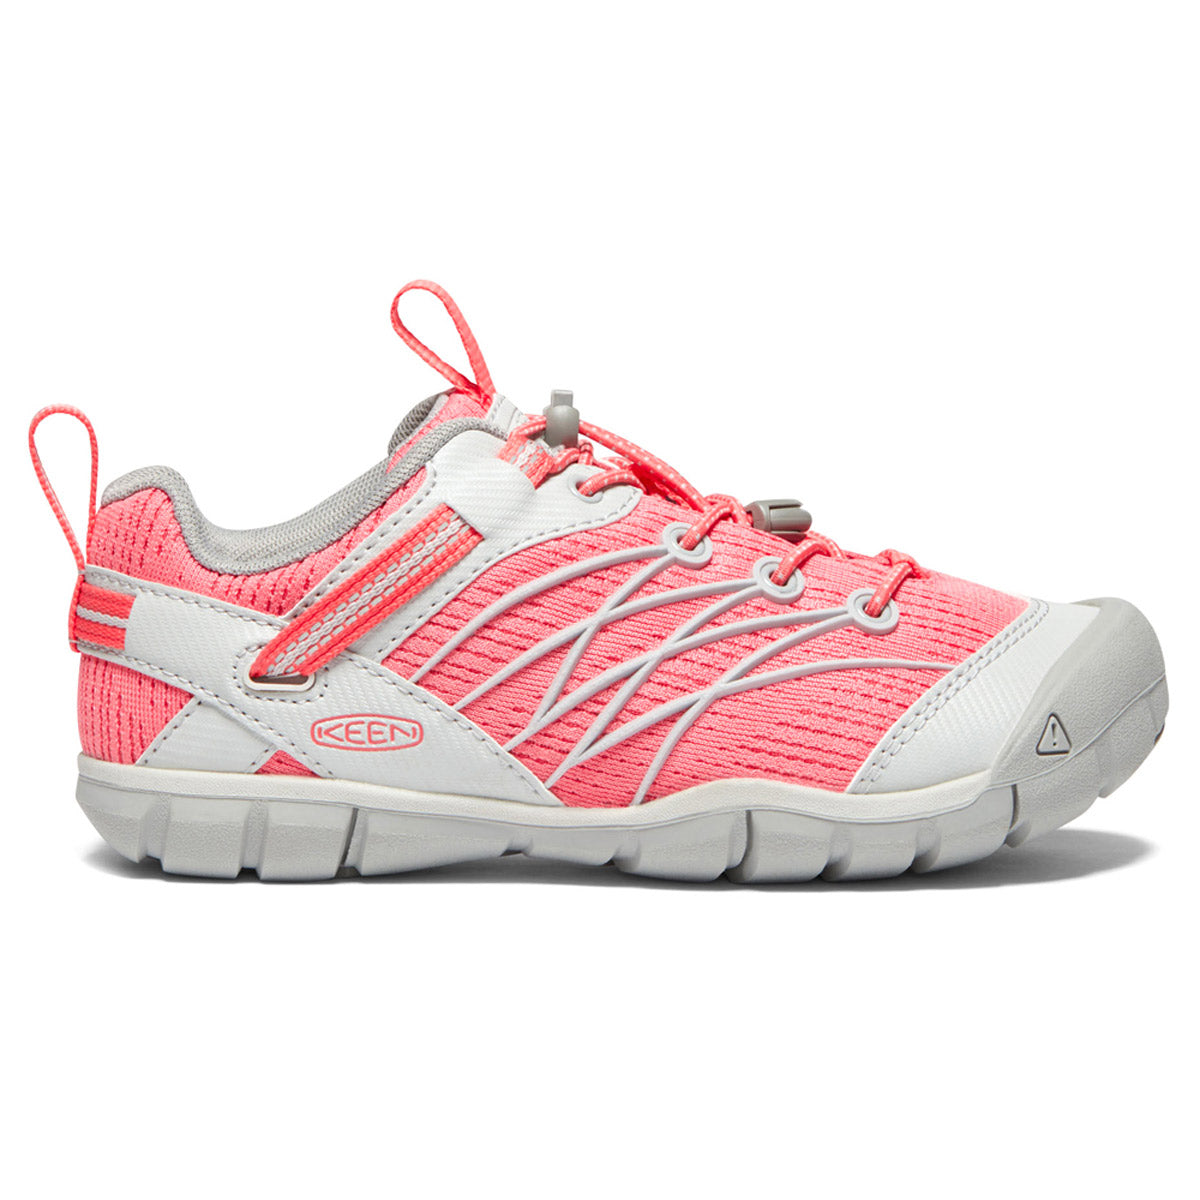 A single pink and white Keen Chandler CNX Youth Drizzle/Dubarry athletic shoe with bungee lacing and lightweight performance mesh displayed against a white background.